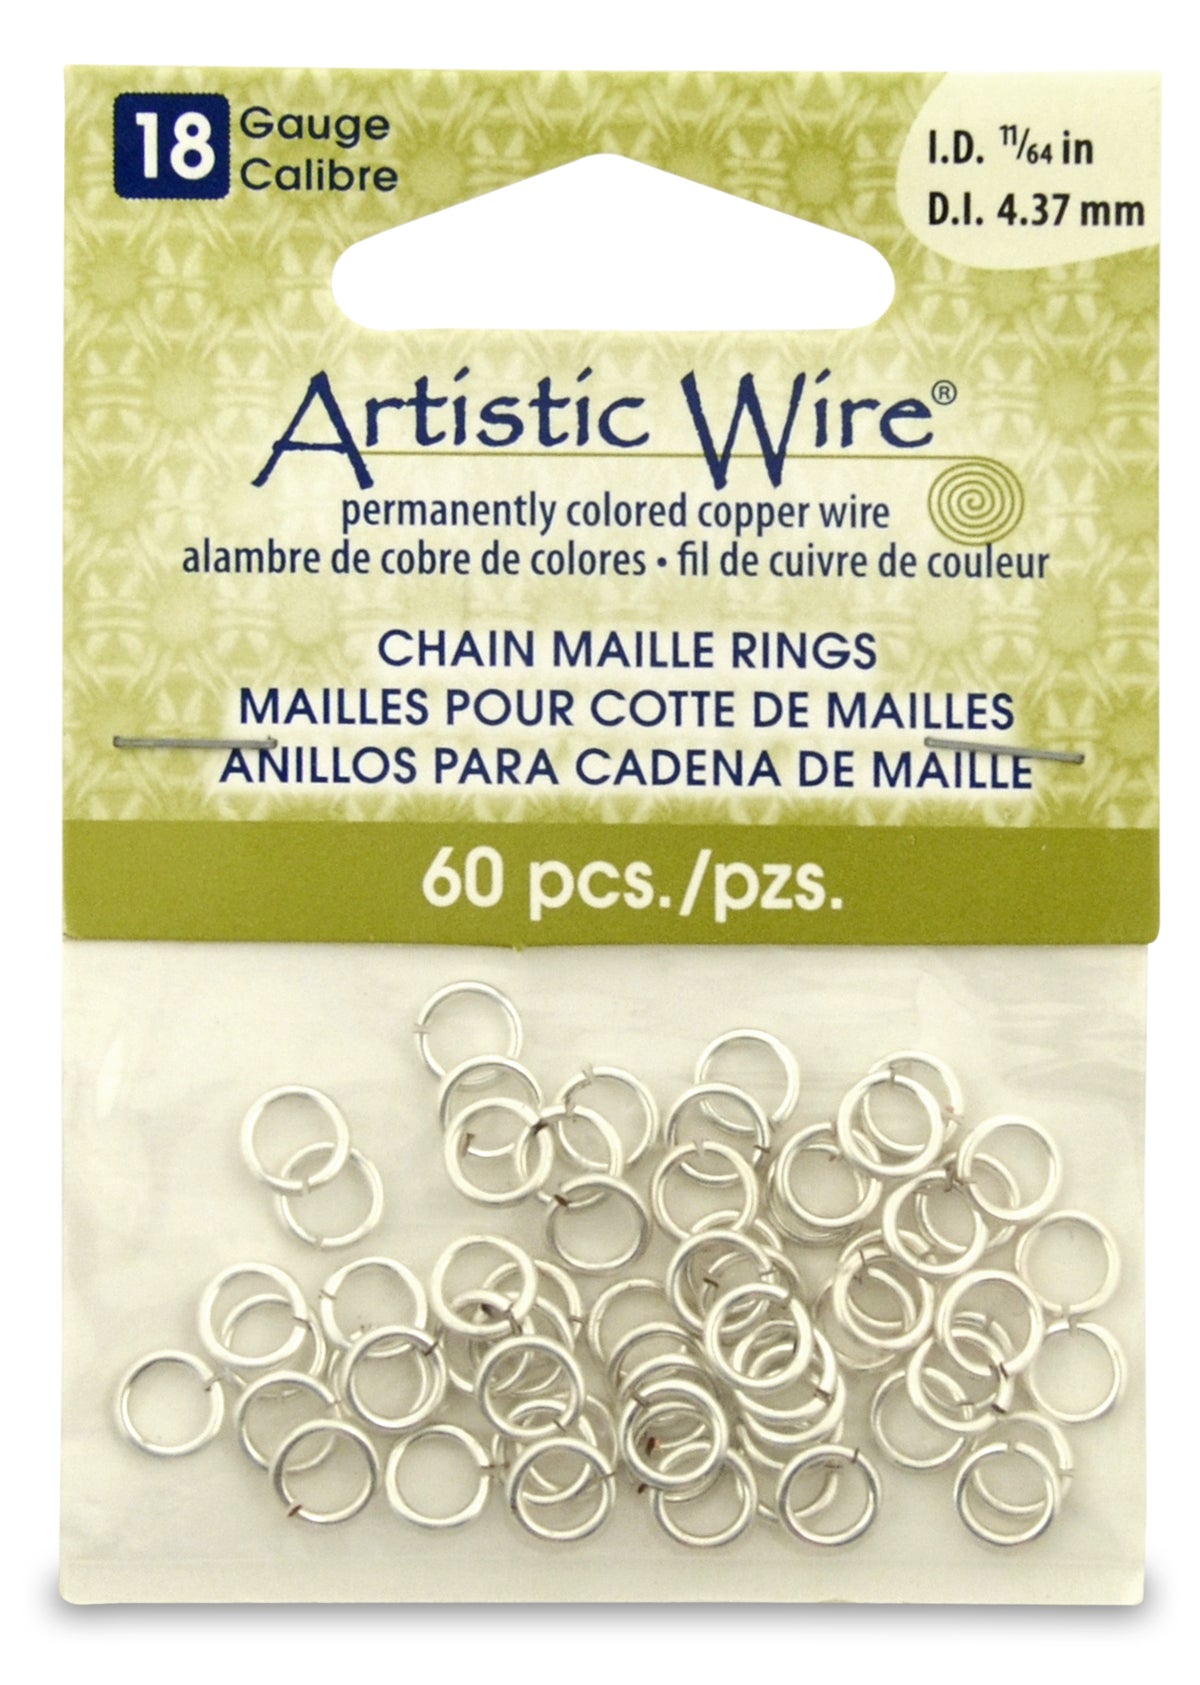 18 Gauge Artistic Wire, Chain Maille Rings, Round, Tarnish Resistant Silver, 11/64 in (4.37 mm), 60 pc